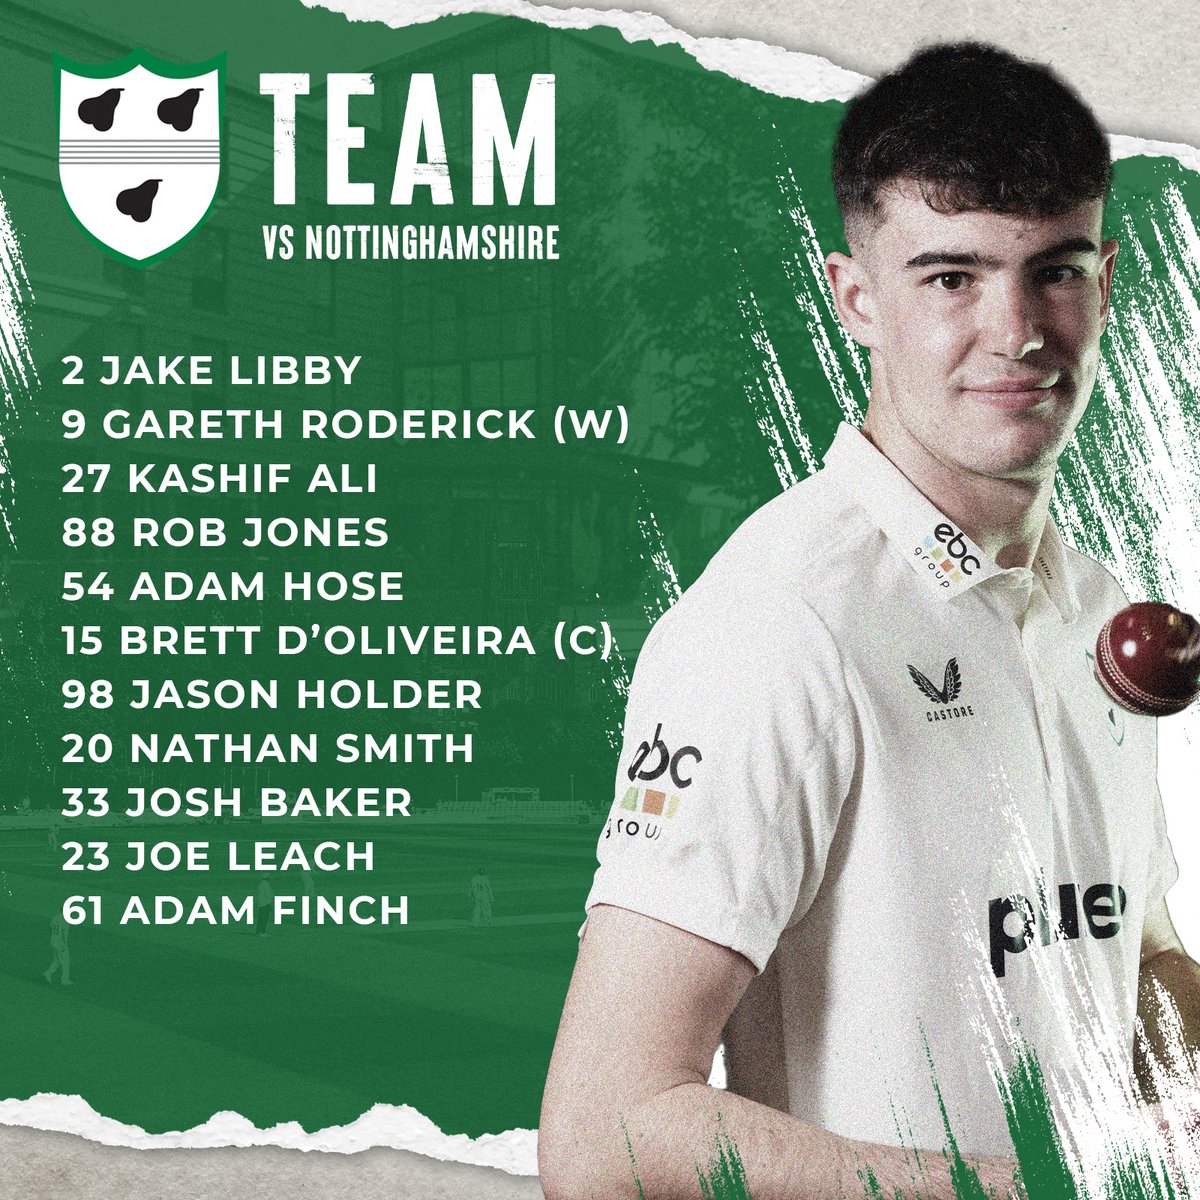 📋 Let's do this  👊

🍐 #WeAreWorcestershire